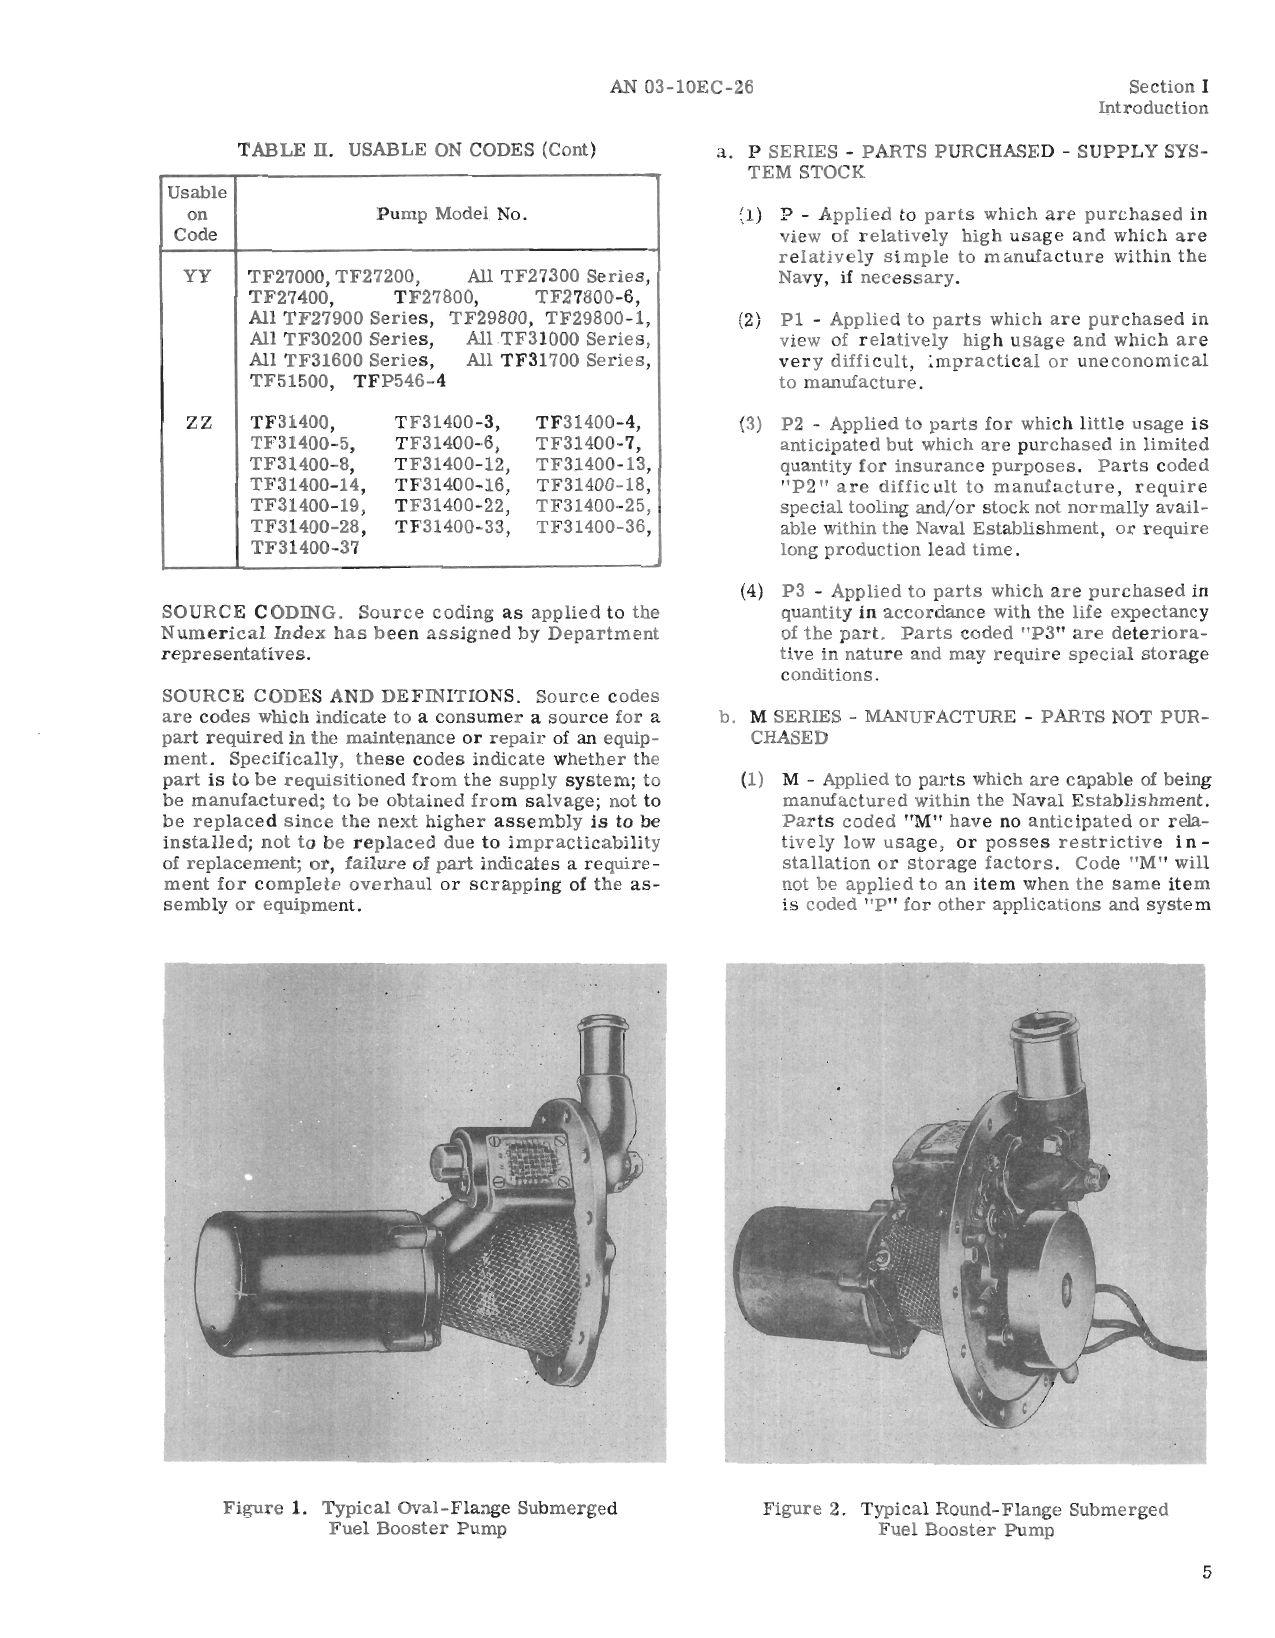 Sample page 7 from AirCorps Library document: Illustrated Parts Breakdown for Submerged Fuel Booster Pump 